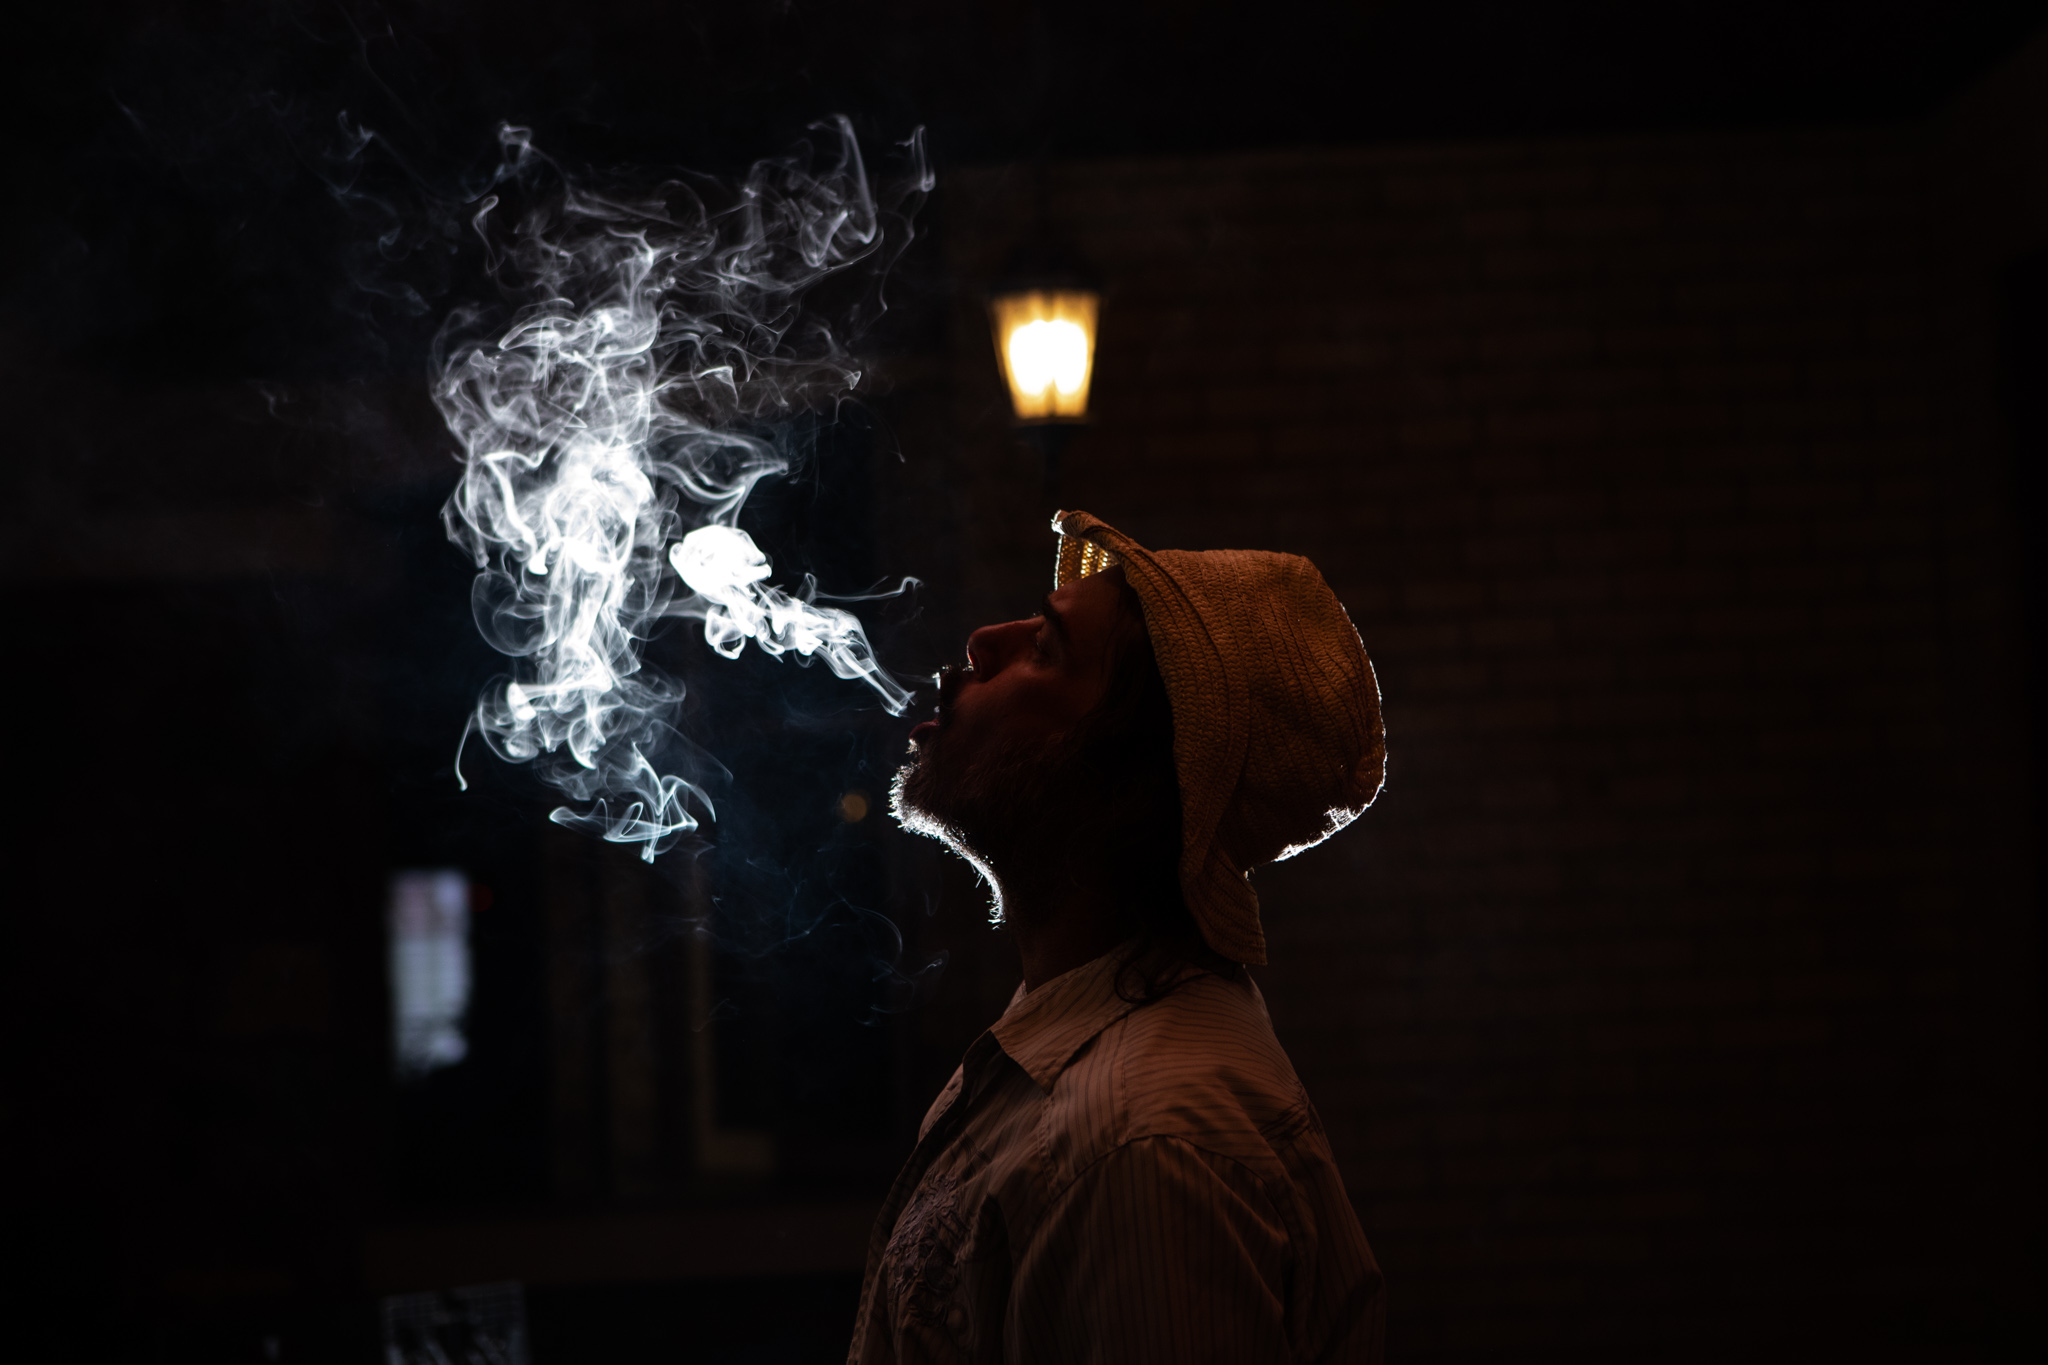 person backlit while blowing smoke.jpg